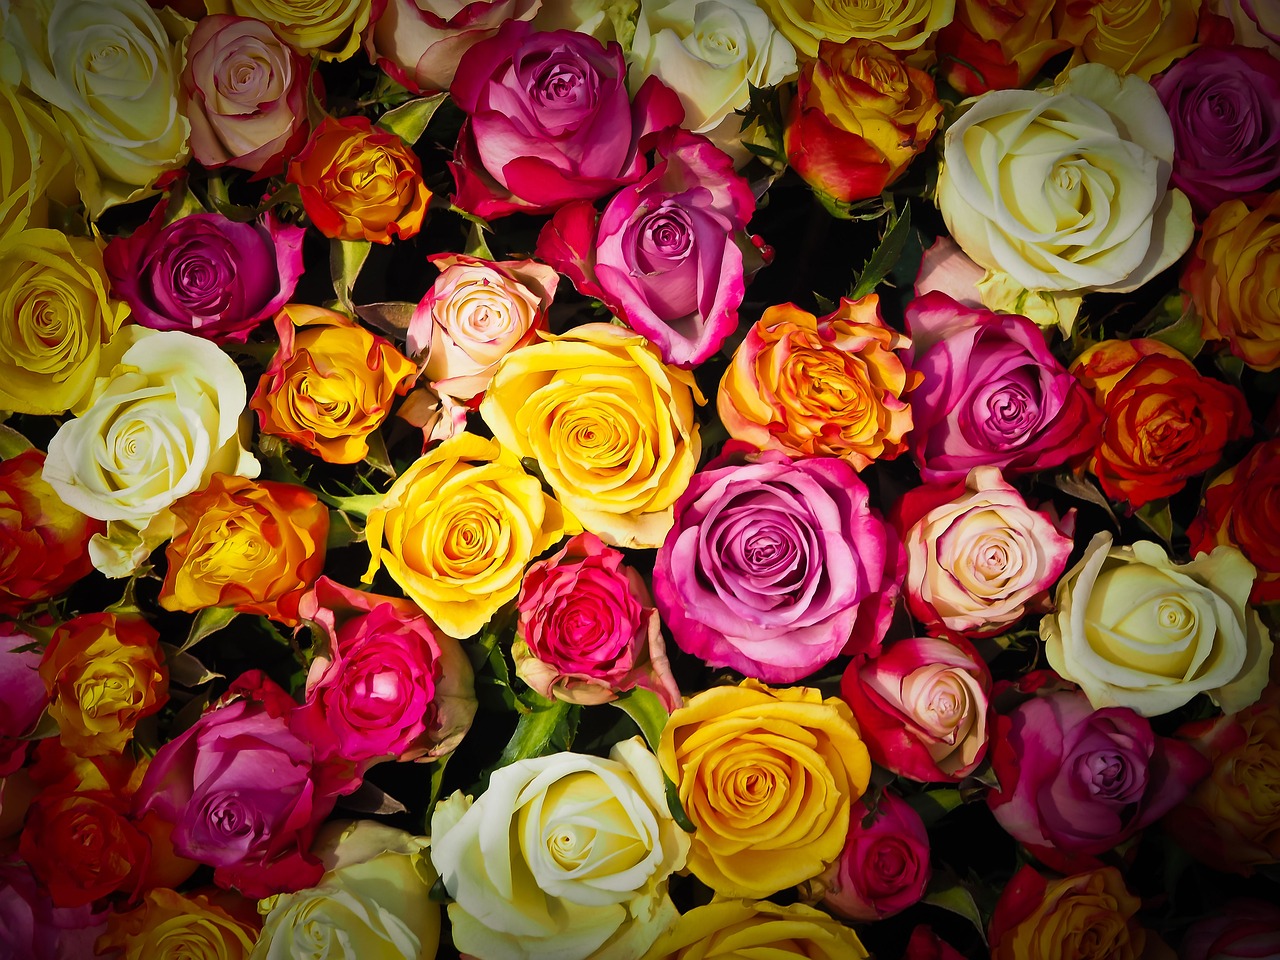 a close up of a bunch of colorful roses, inspired by Jan Henryk Rosen, pexels, post processed denoised, 🌸 🌼 💮, hi resolution, flowers background